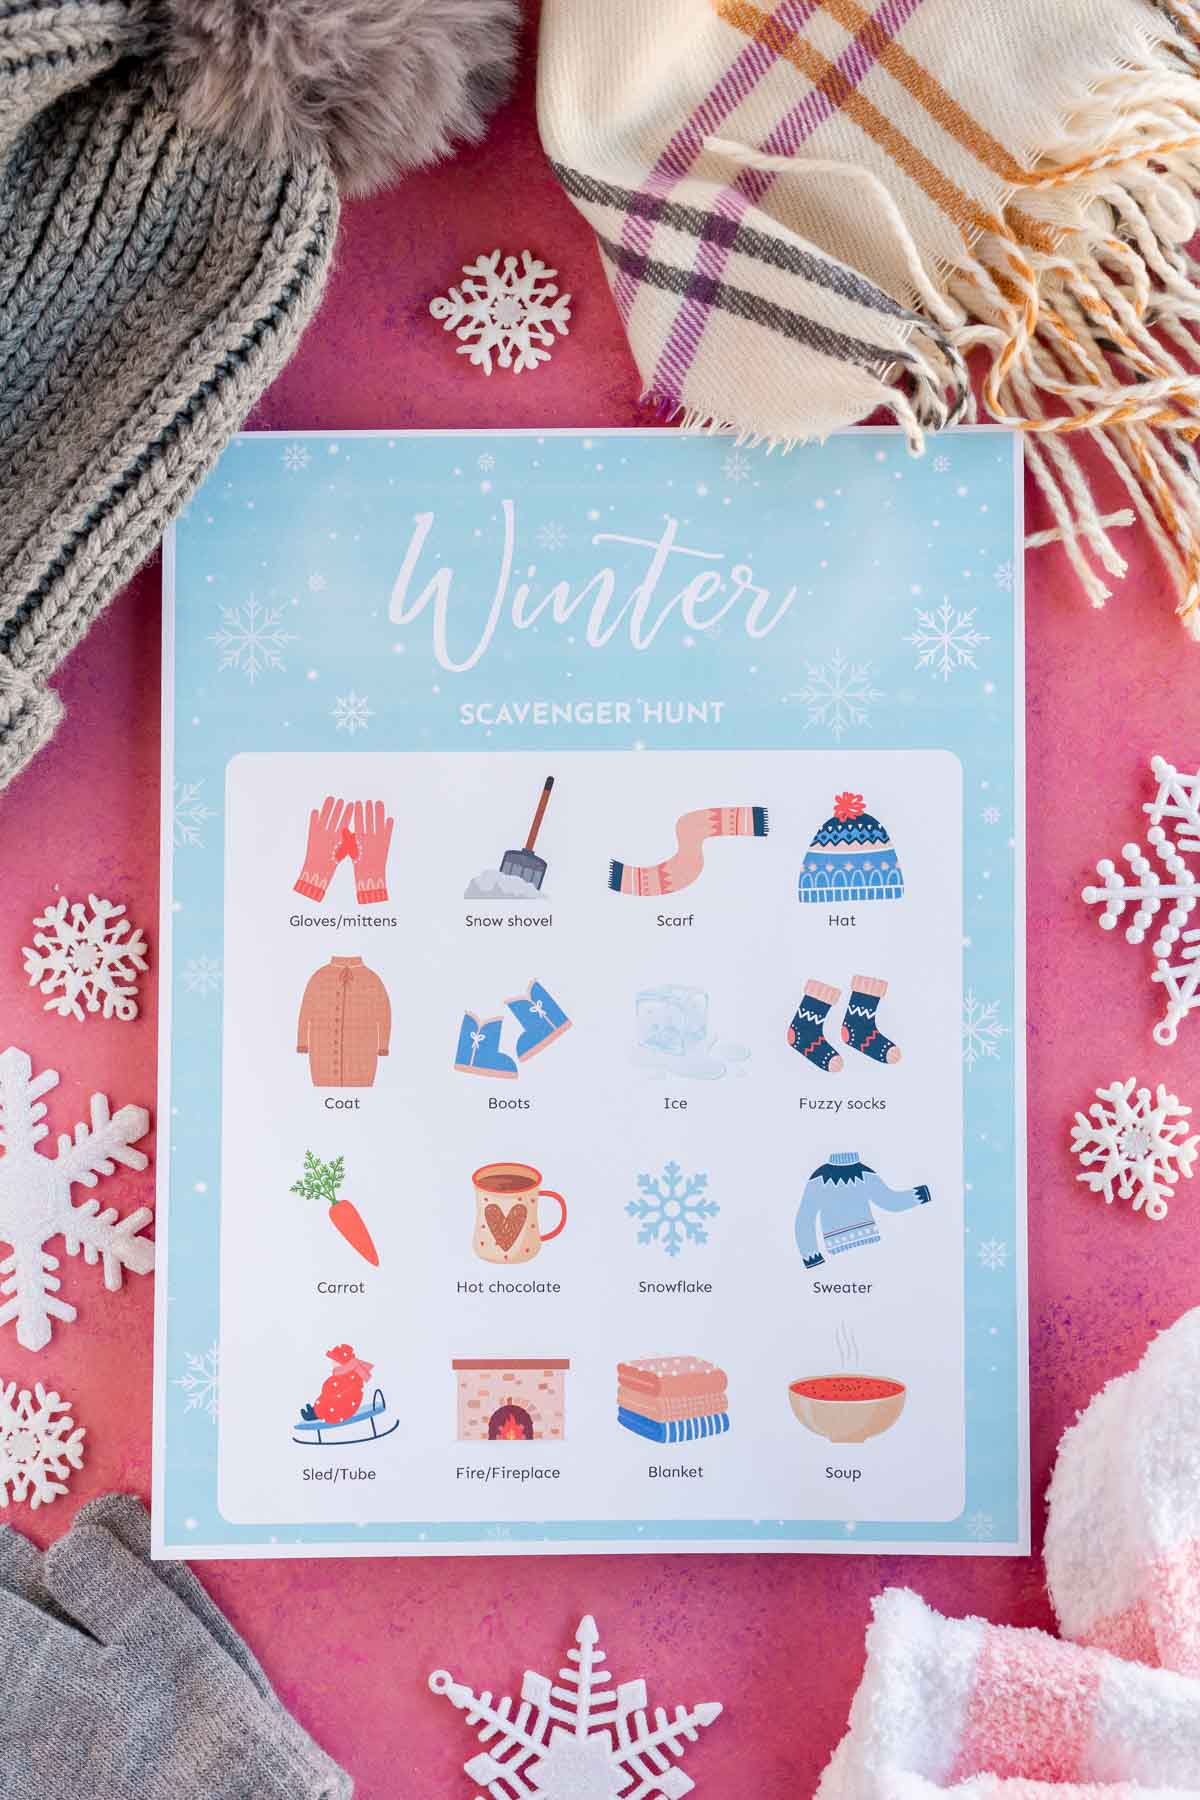 Printed out winter scavenger hunt with pictures